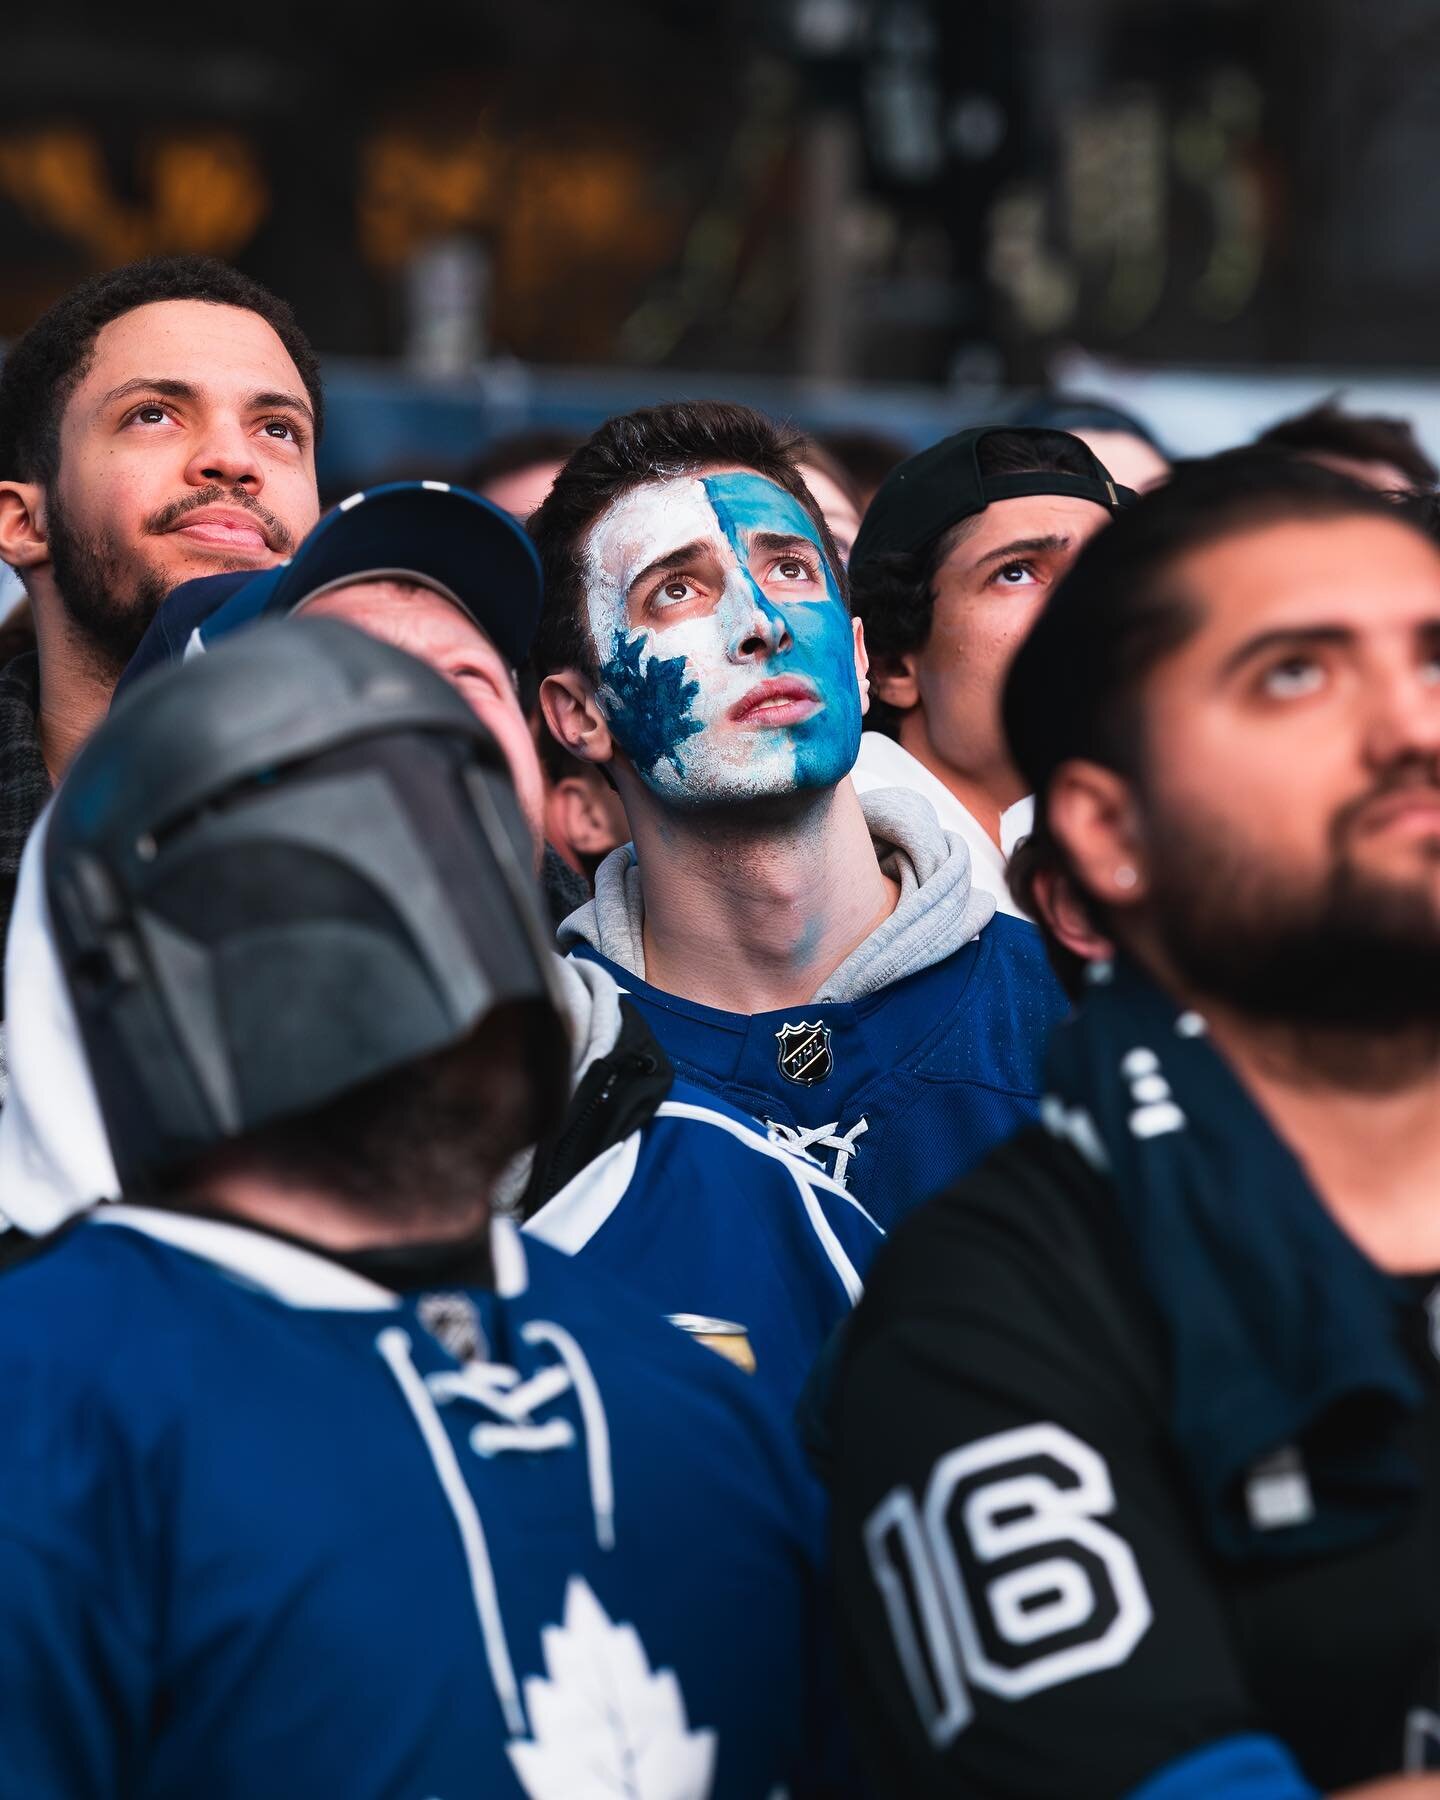 The many moods heading into Game 5 tonight. Let&rsquo;s go buds! #goleafsgo

📸 @laurenhowephotography